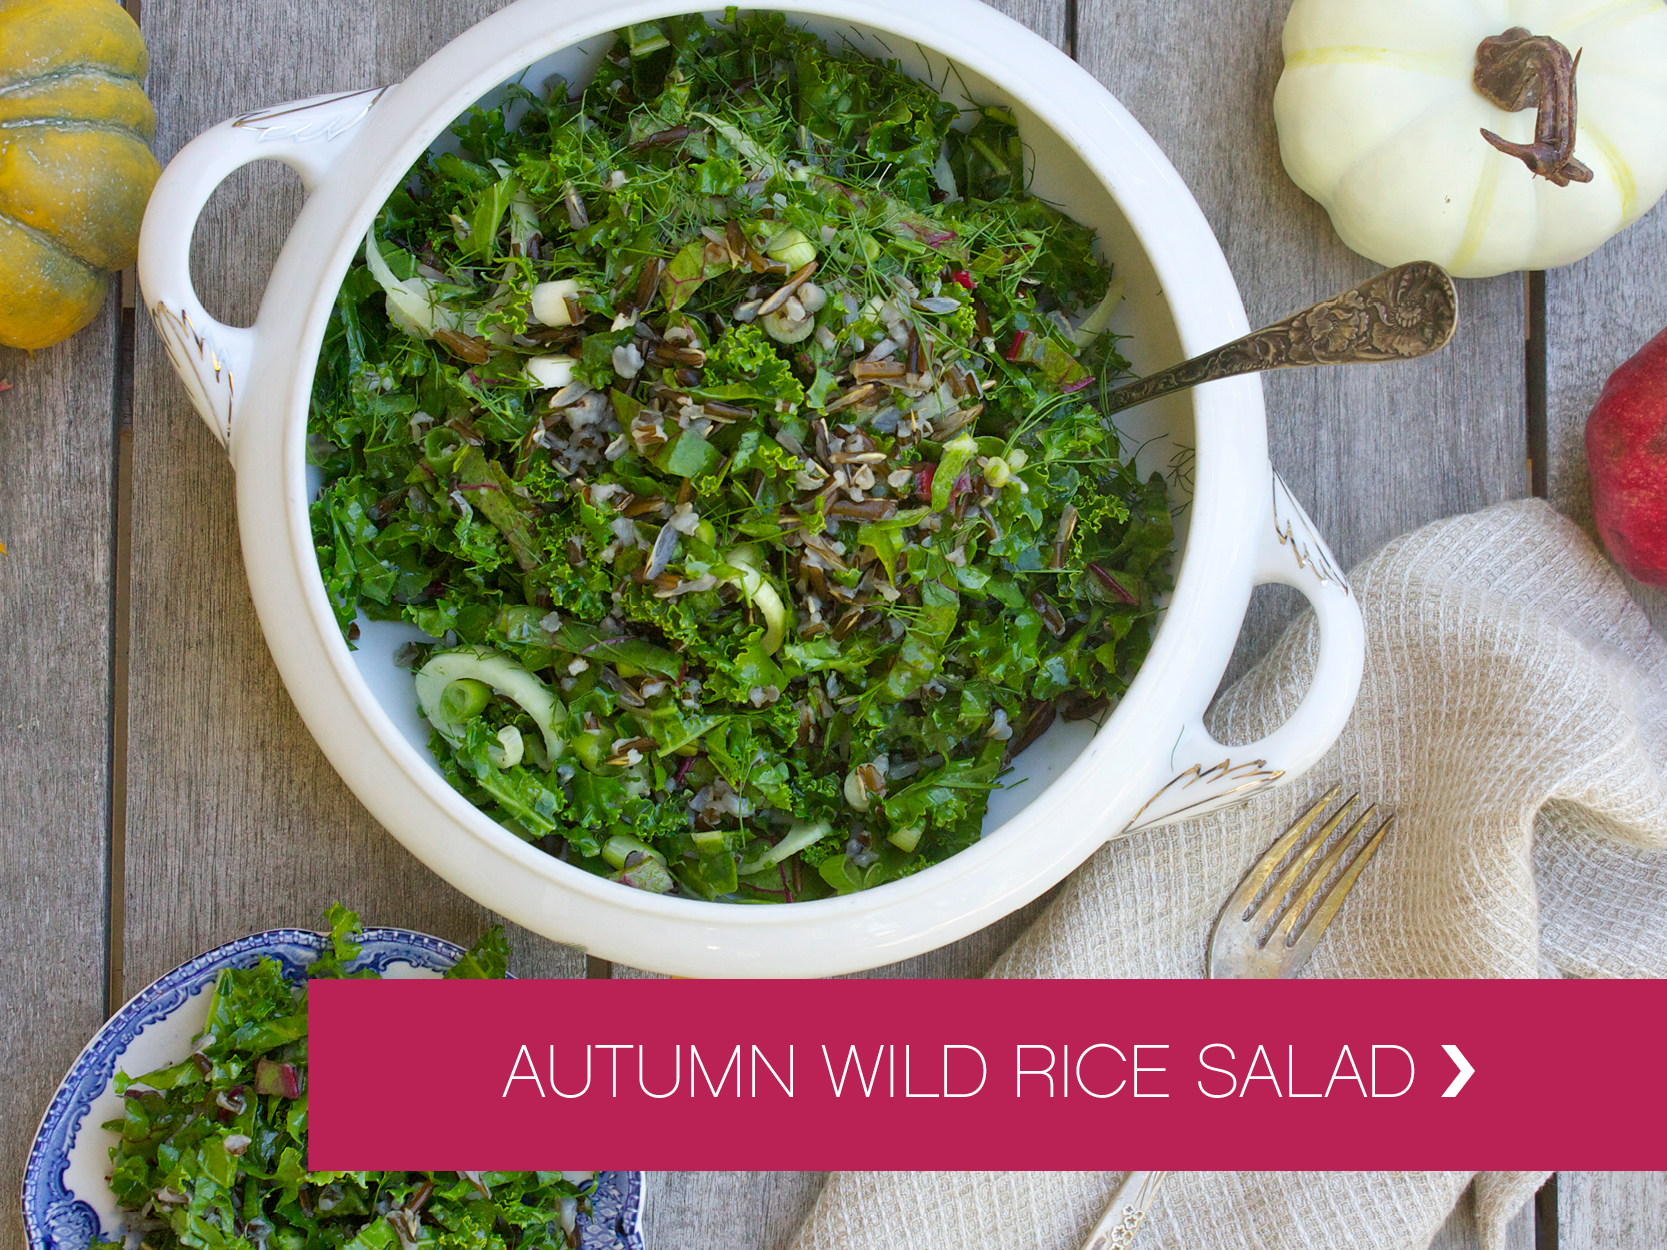 Conscious Cleanse | Autumn Wild Rice Salad | www.consciouscleanse.com | #healthytthanksgiving #wildricesalad #wholefoodcleanse